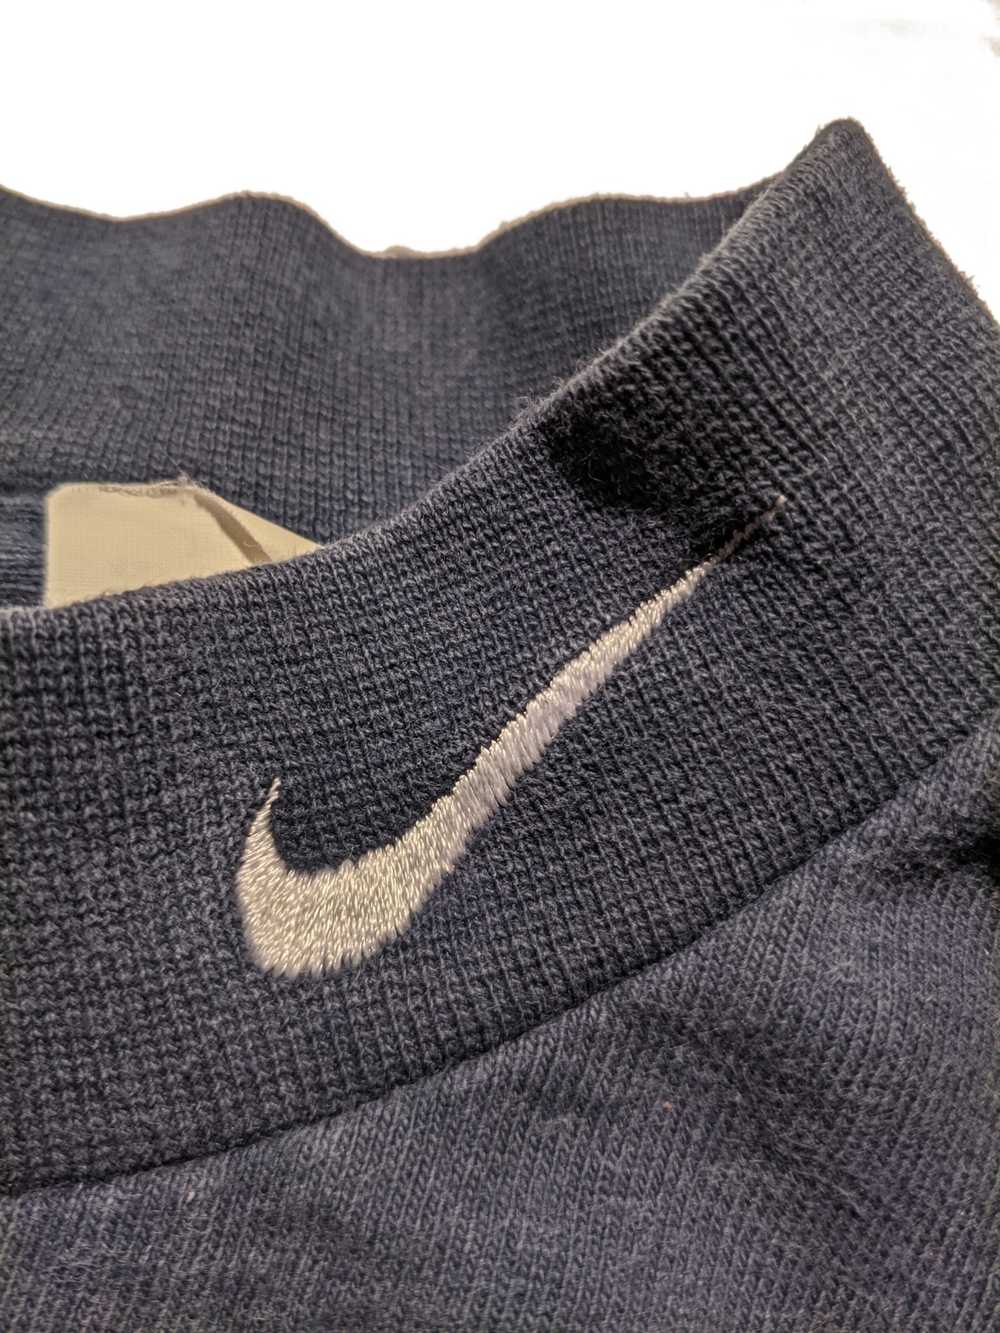 Nike XL Navy Blue Vintage 1990s USA Embroidered M… - image 2